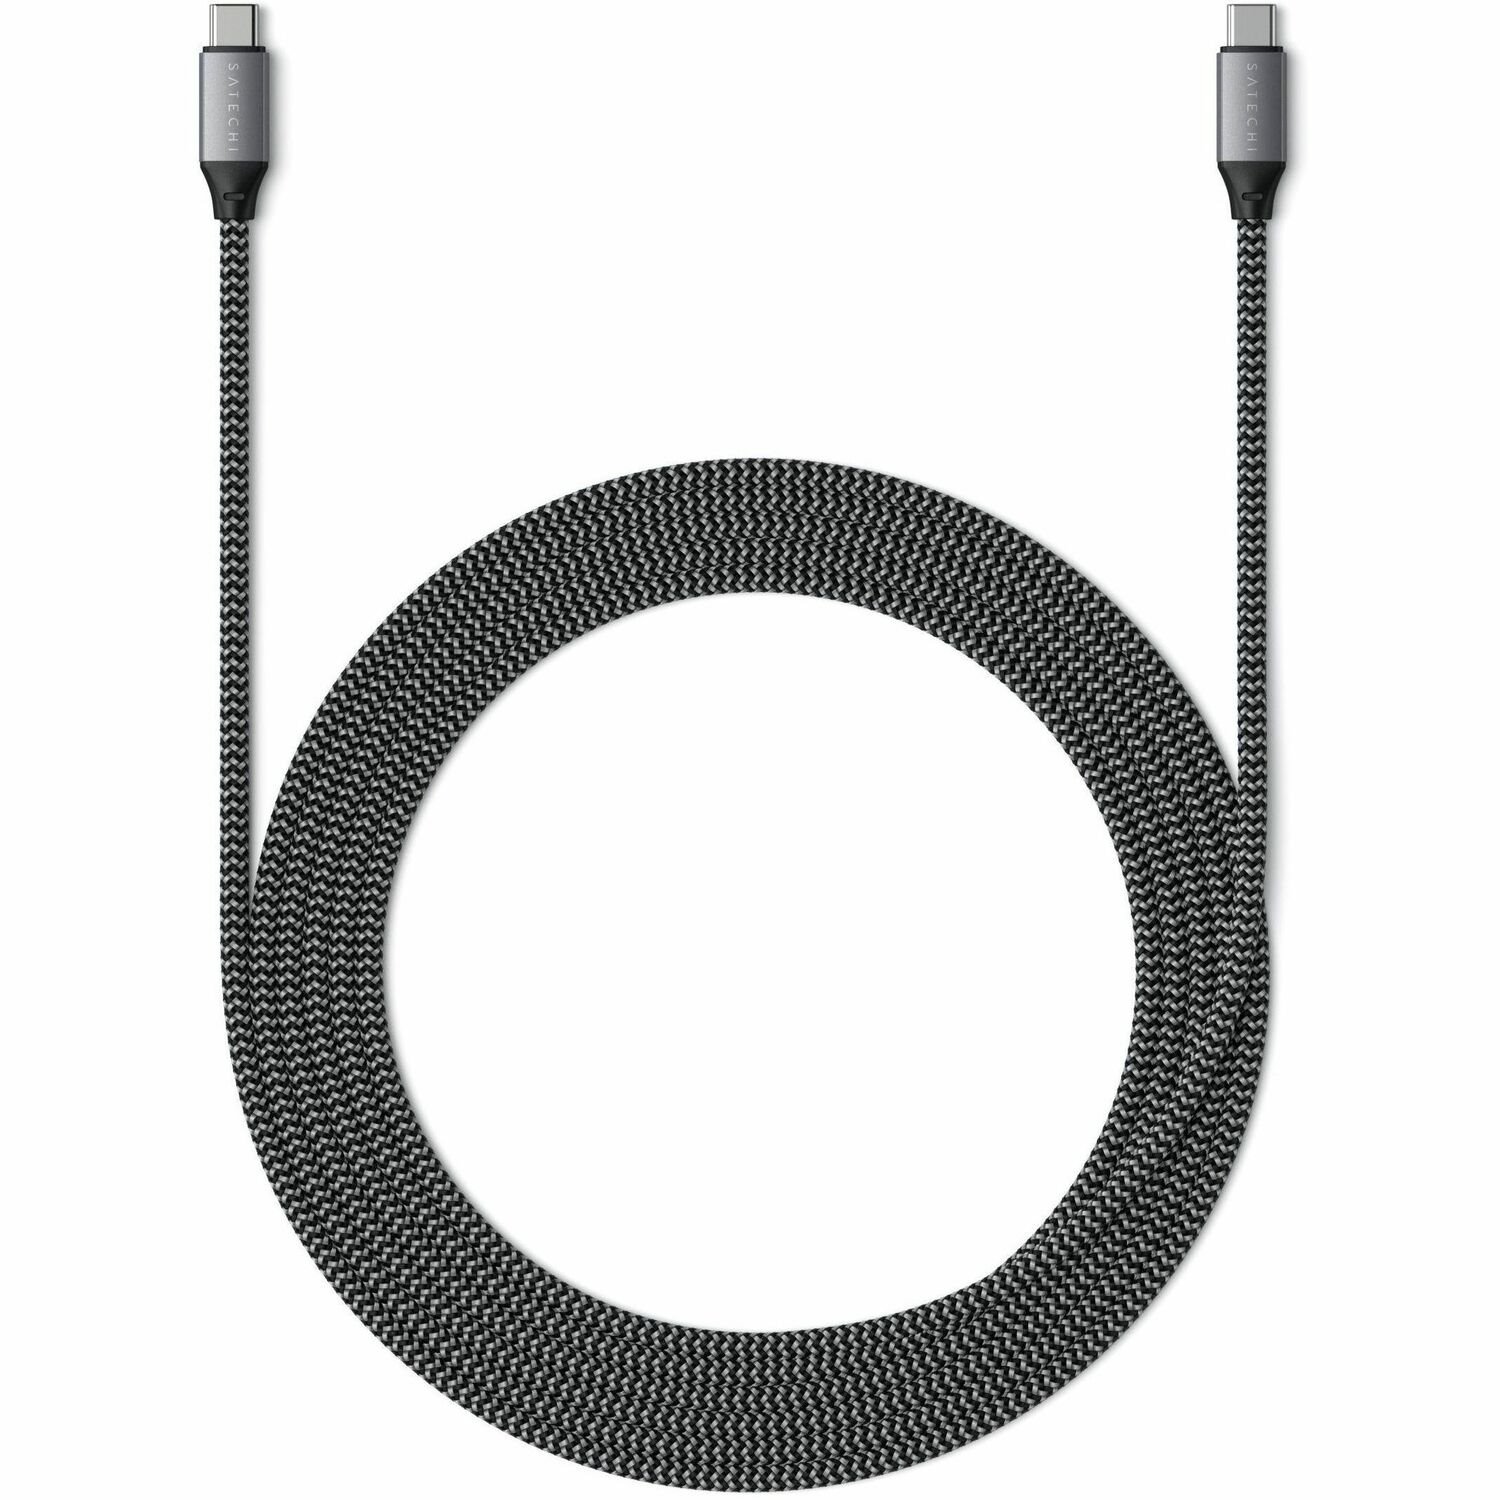 Satechi USB-C to USB-C 100W Charging Cable